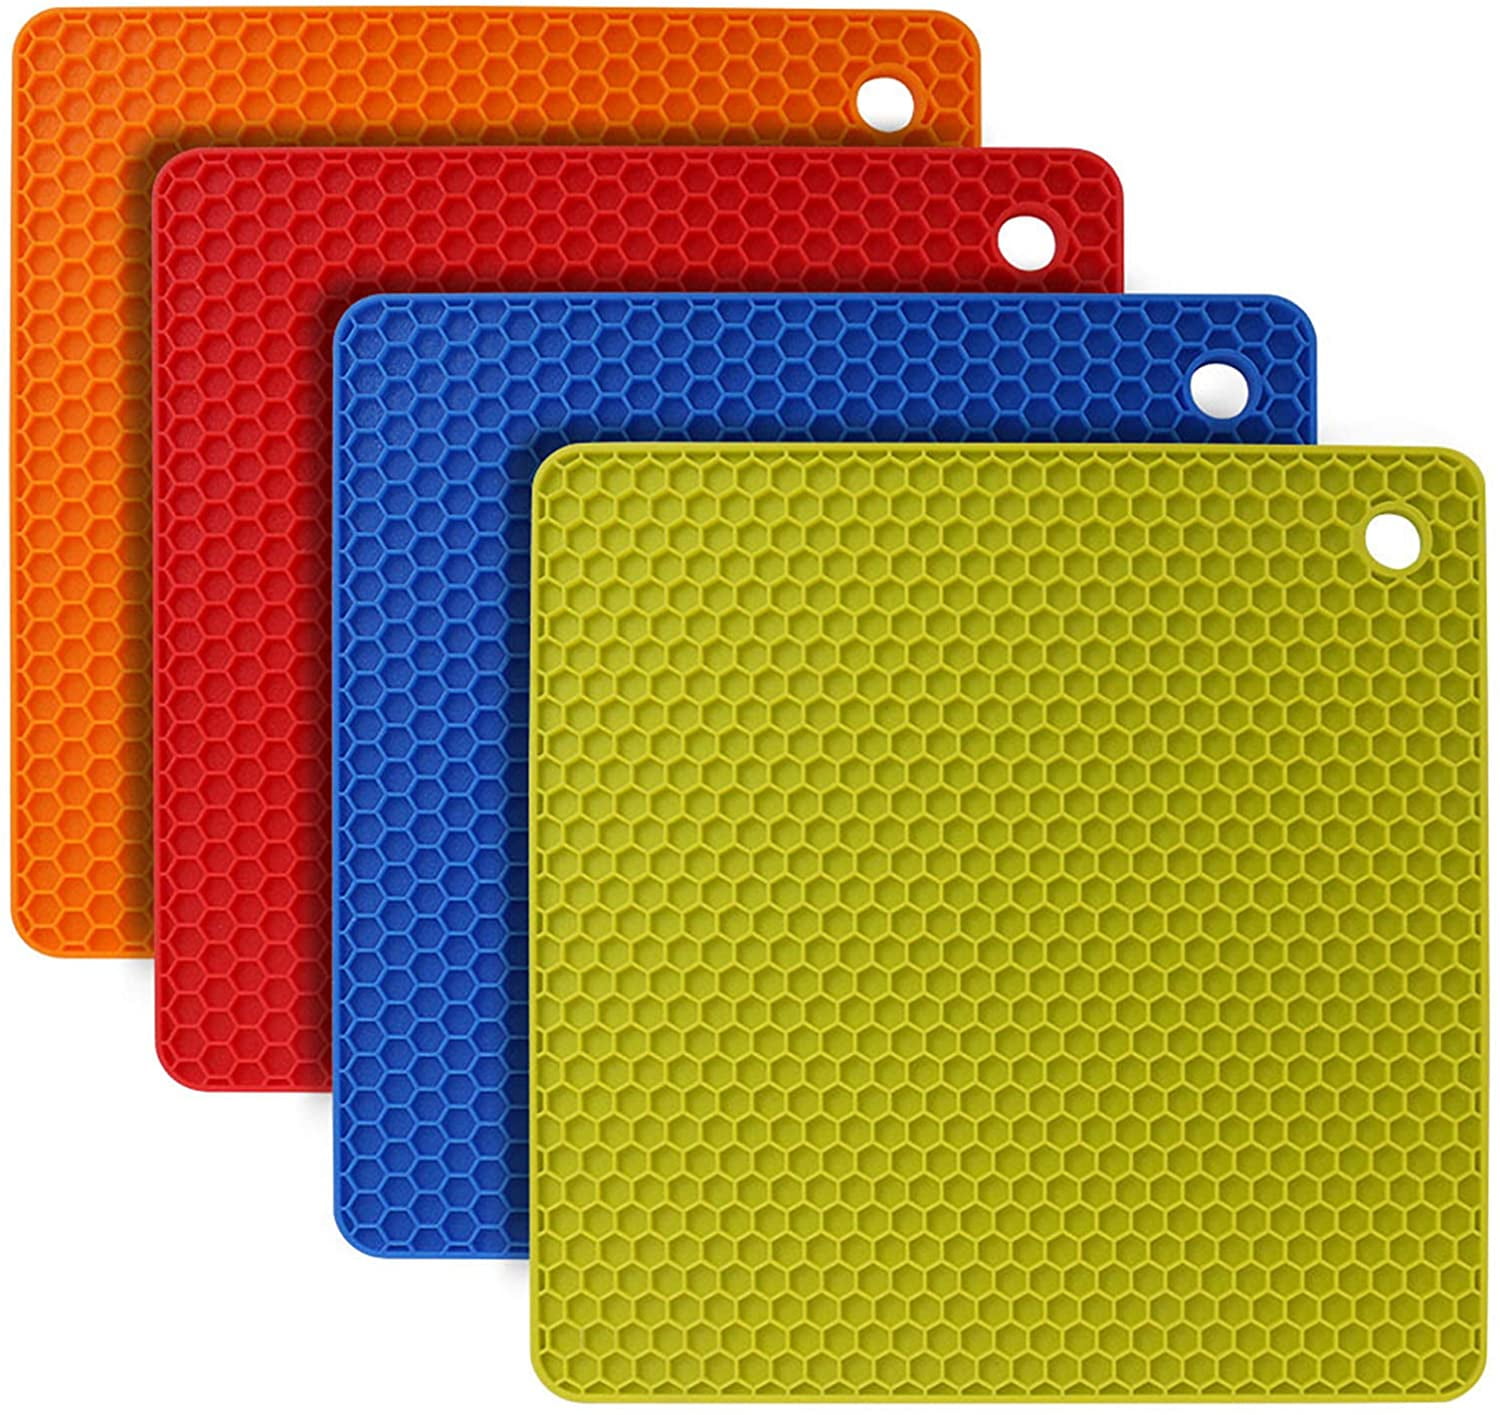 Multi-Purpose Honeycomb Heat Resistant Kitchen Table Pads for Hot Plate Pot Dish and Bowl Black Silicone Trivets Non-Slip Placemats Newthinking 4Pcs Silicone Table Mats 